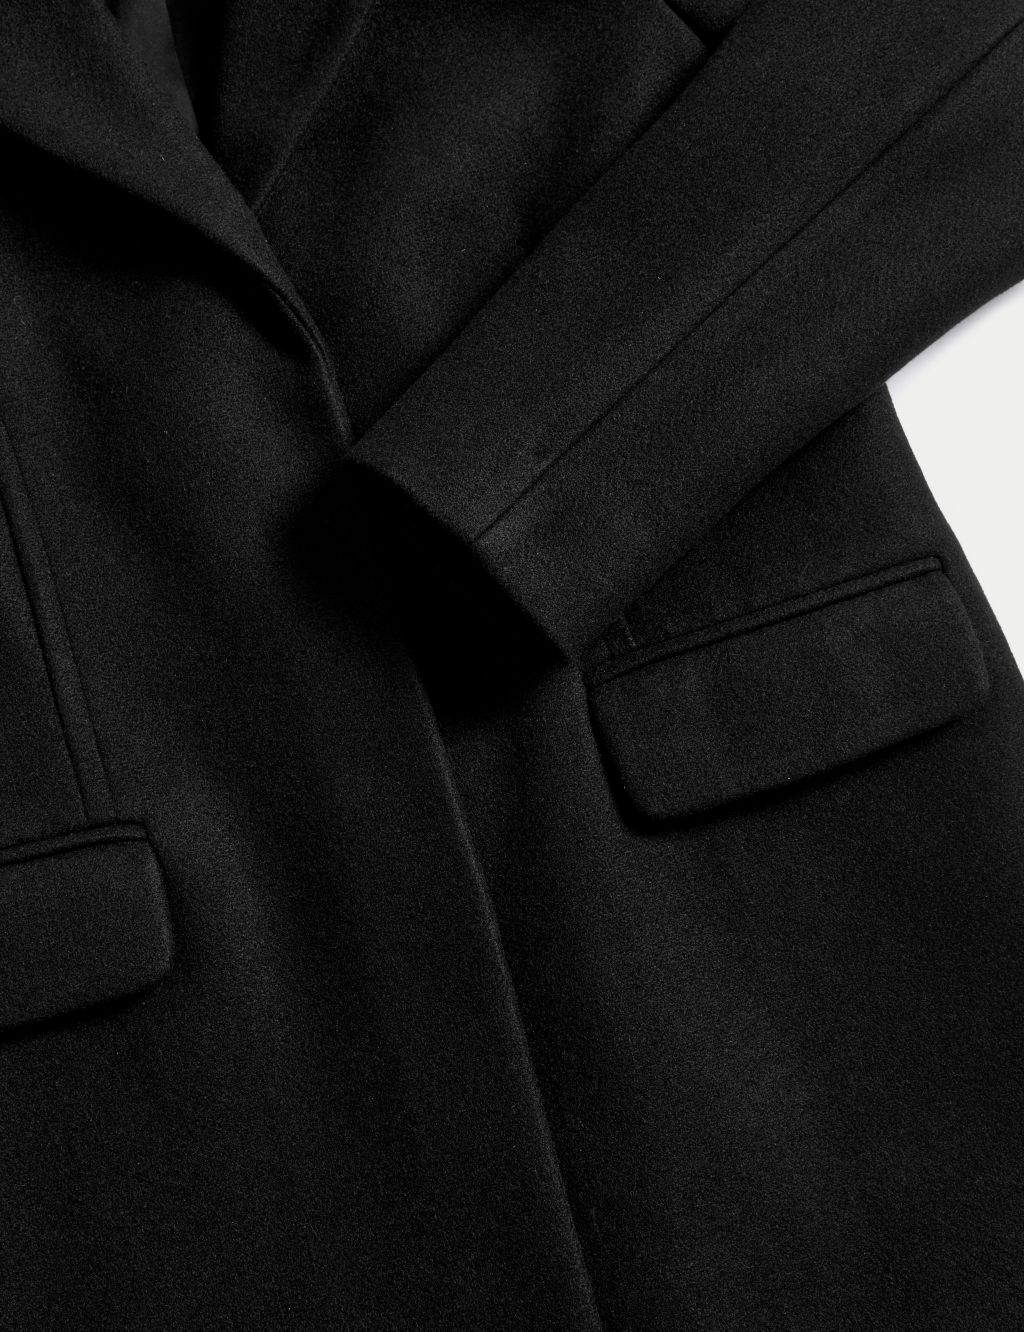 Tailored Single Breasted Coat image 6